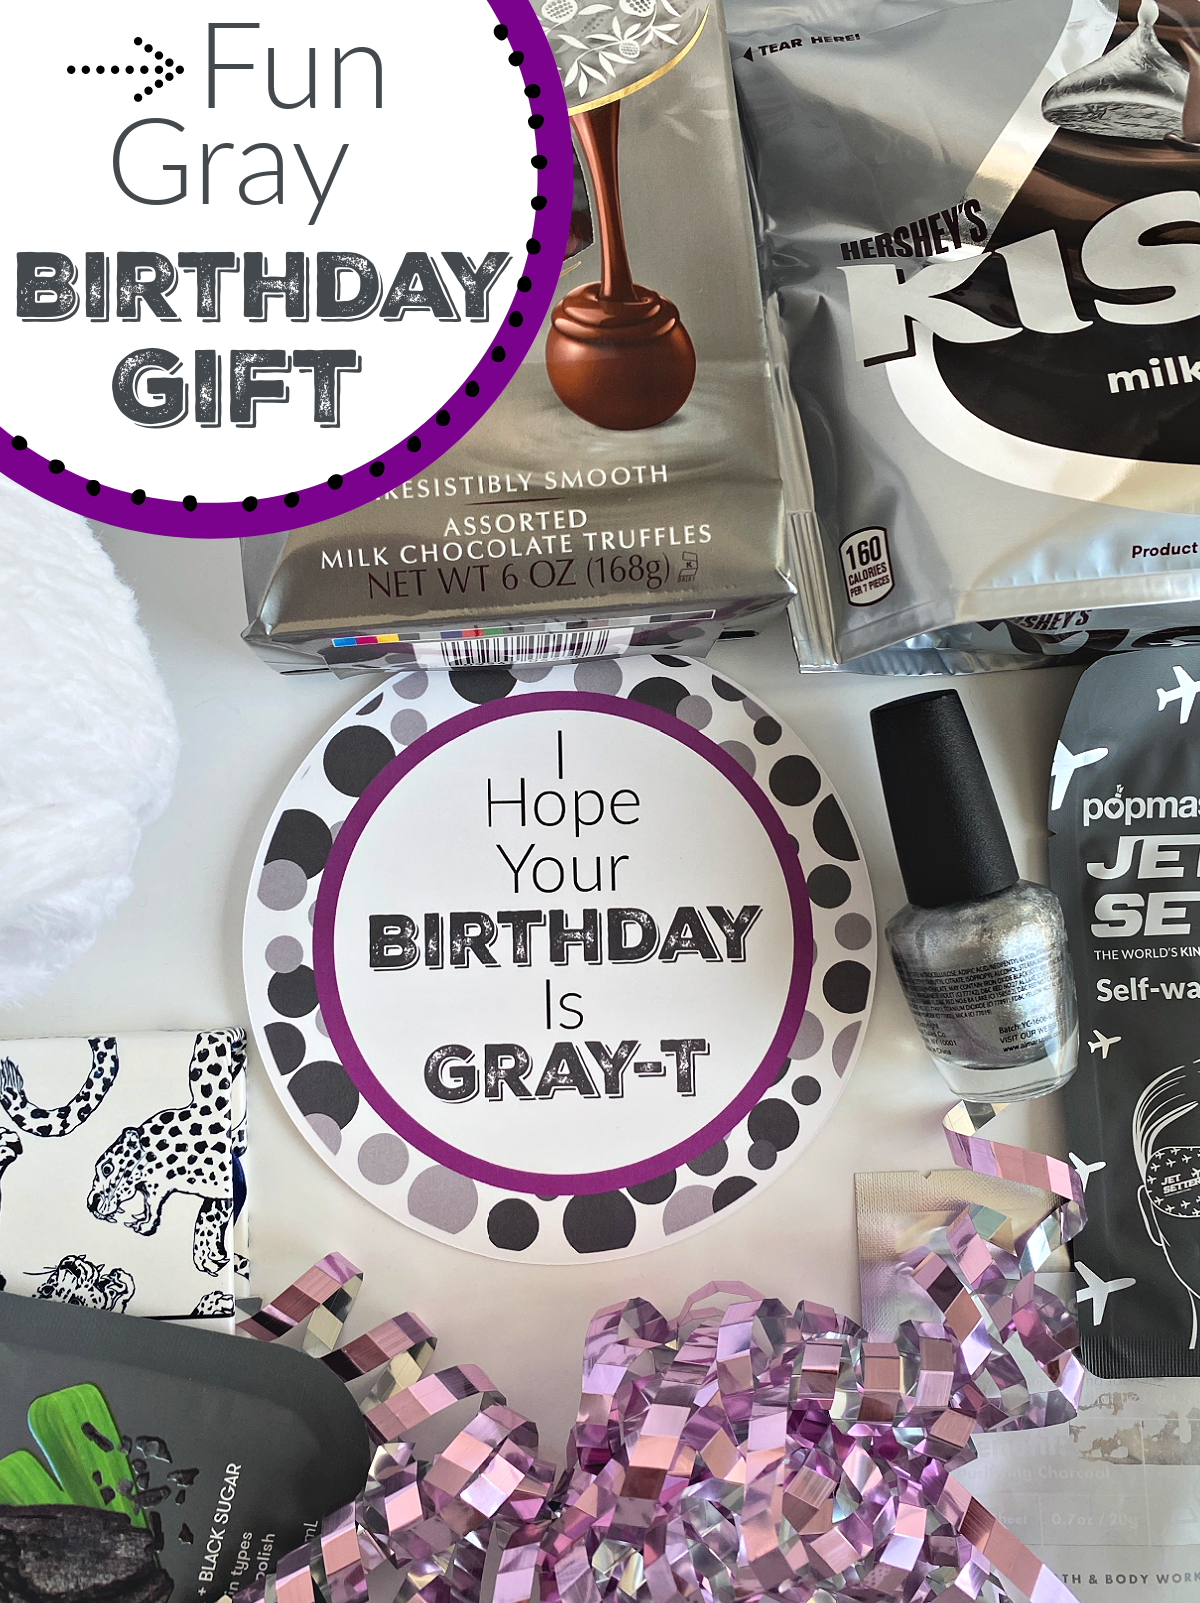 Simple Birthday Gift. This fun and simple birthday gift idea is perfect for friends. #fungifts #simplebirthdaygift #graygiftidea